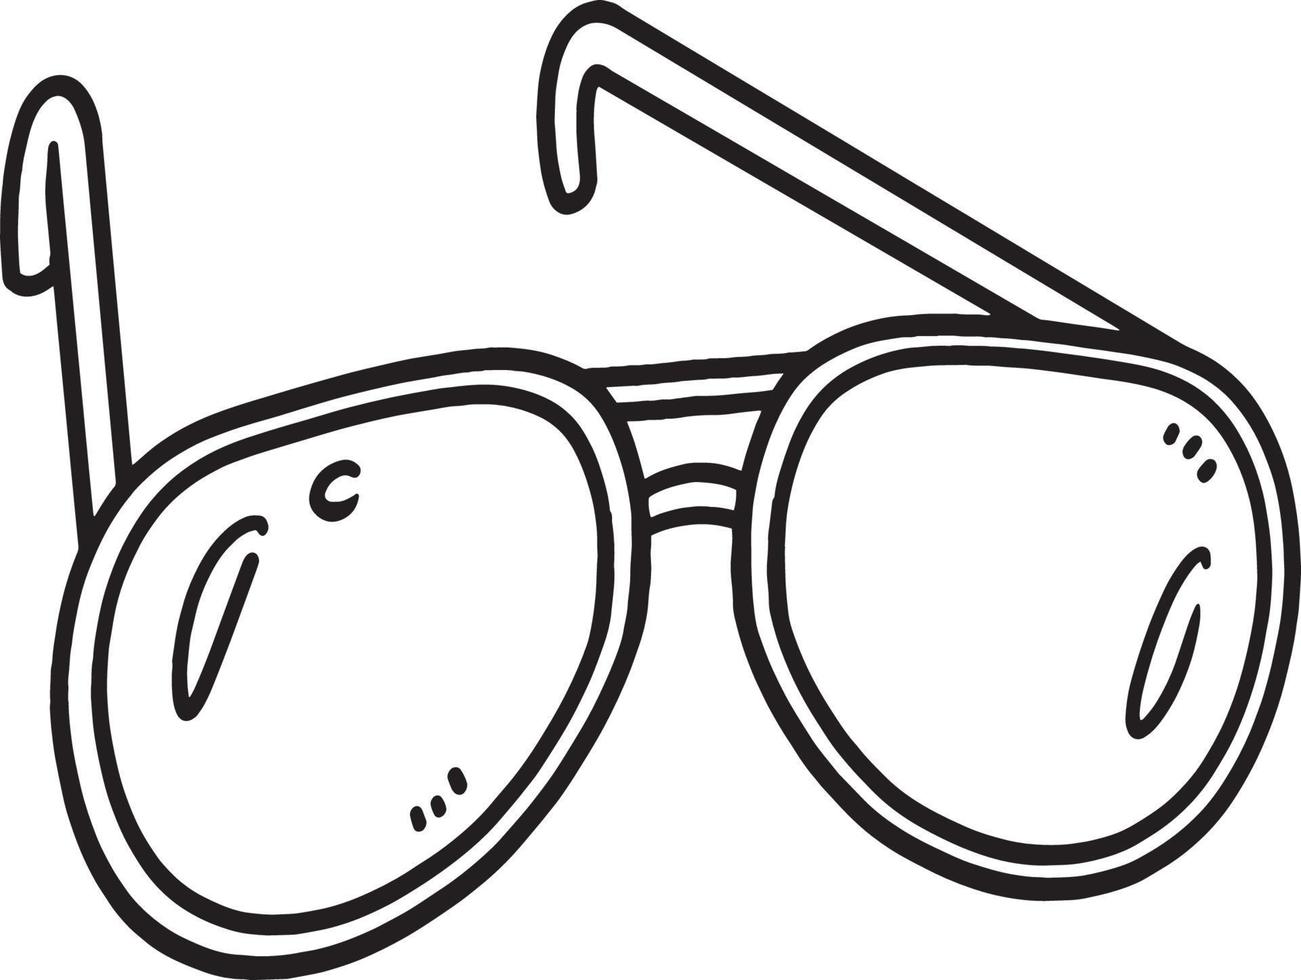 Sunglasses Isolated Coloring Page for Kids vector